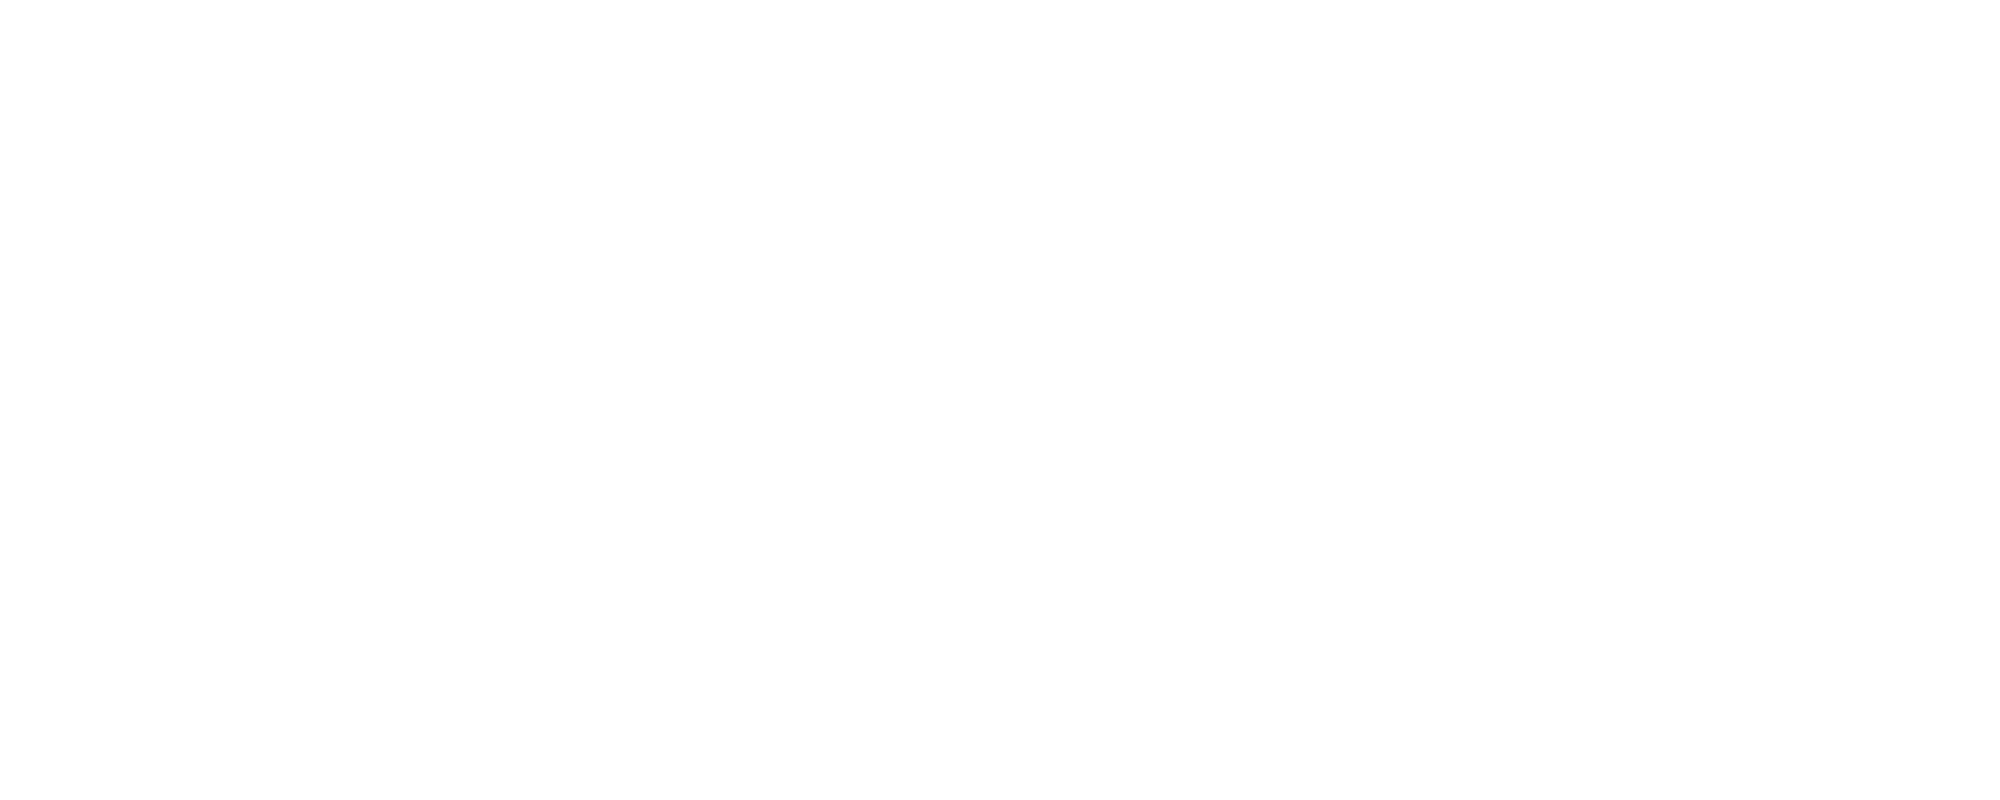 SPECTRUM PARTNERS WITH OVATION TV TO SUPPORT ORLANDO’S CREATIVE CITY PROJECT WITH $10,000 STAND FOR THE ARTS AWARD